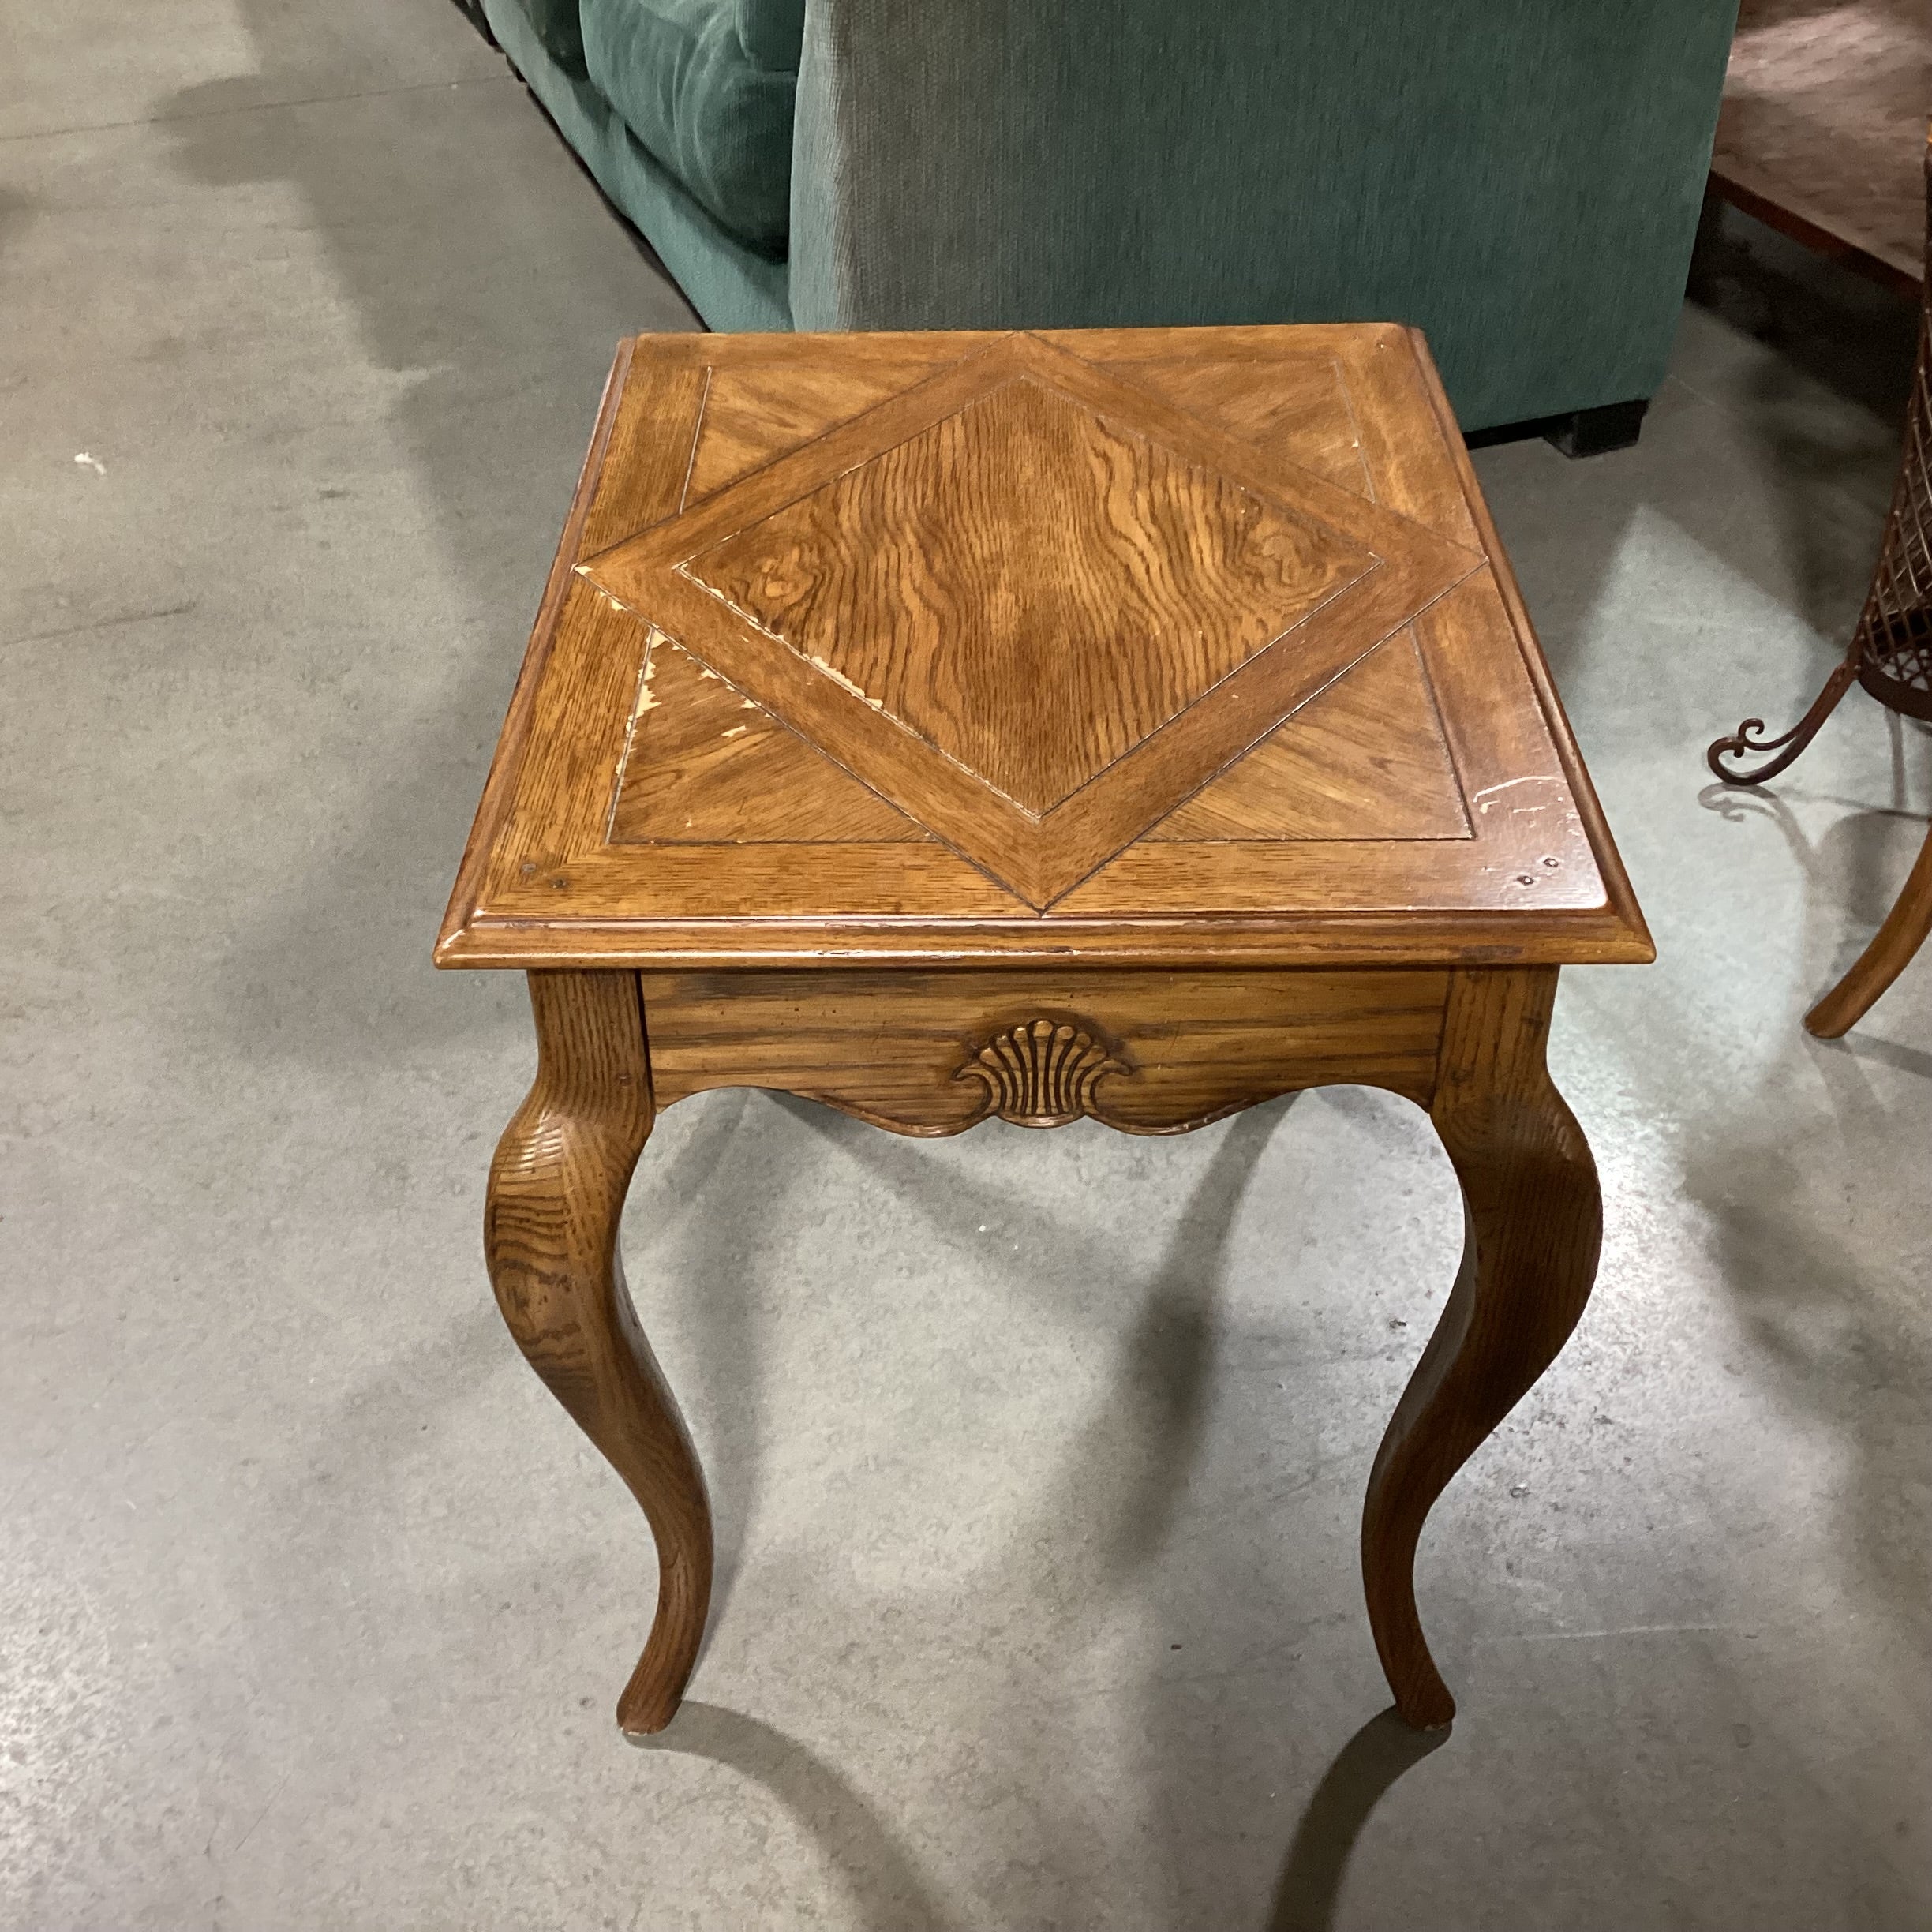 Heritage Carved Wood Bowed Legs End Table 27"x 21"x 24"